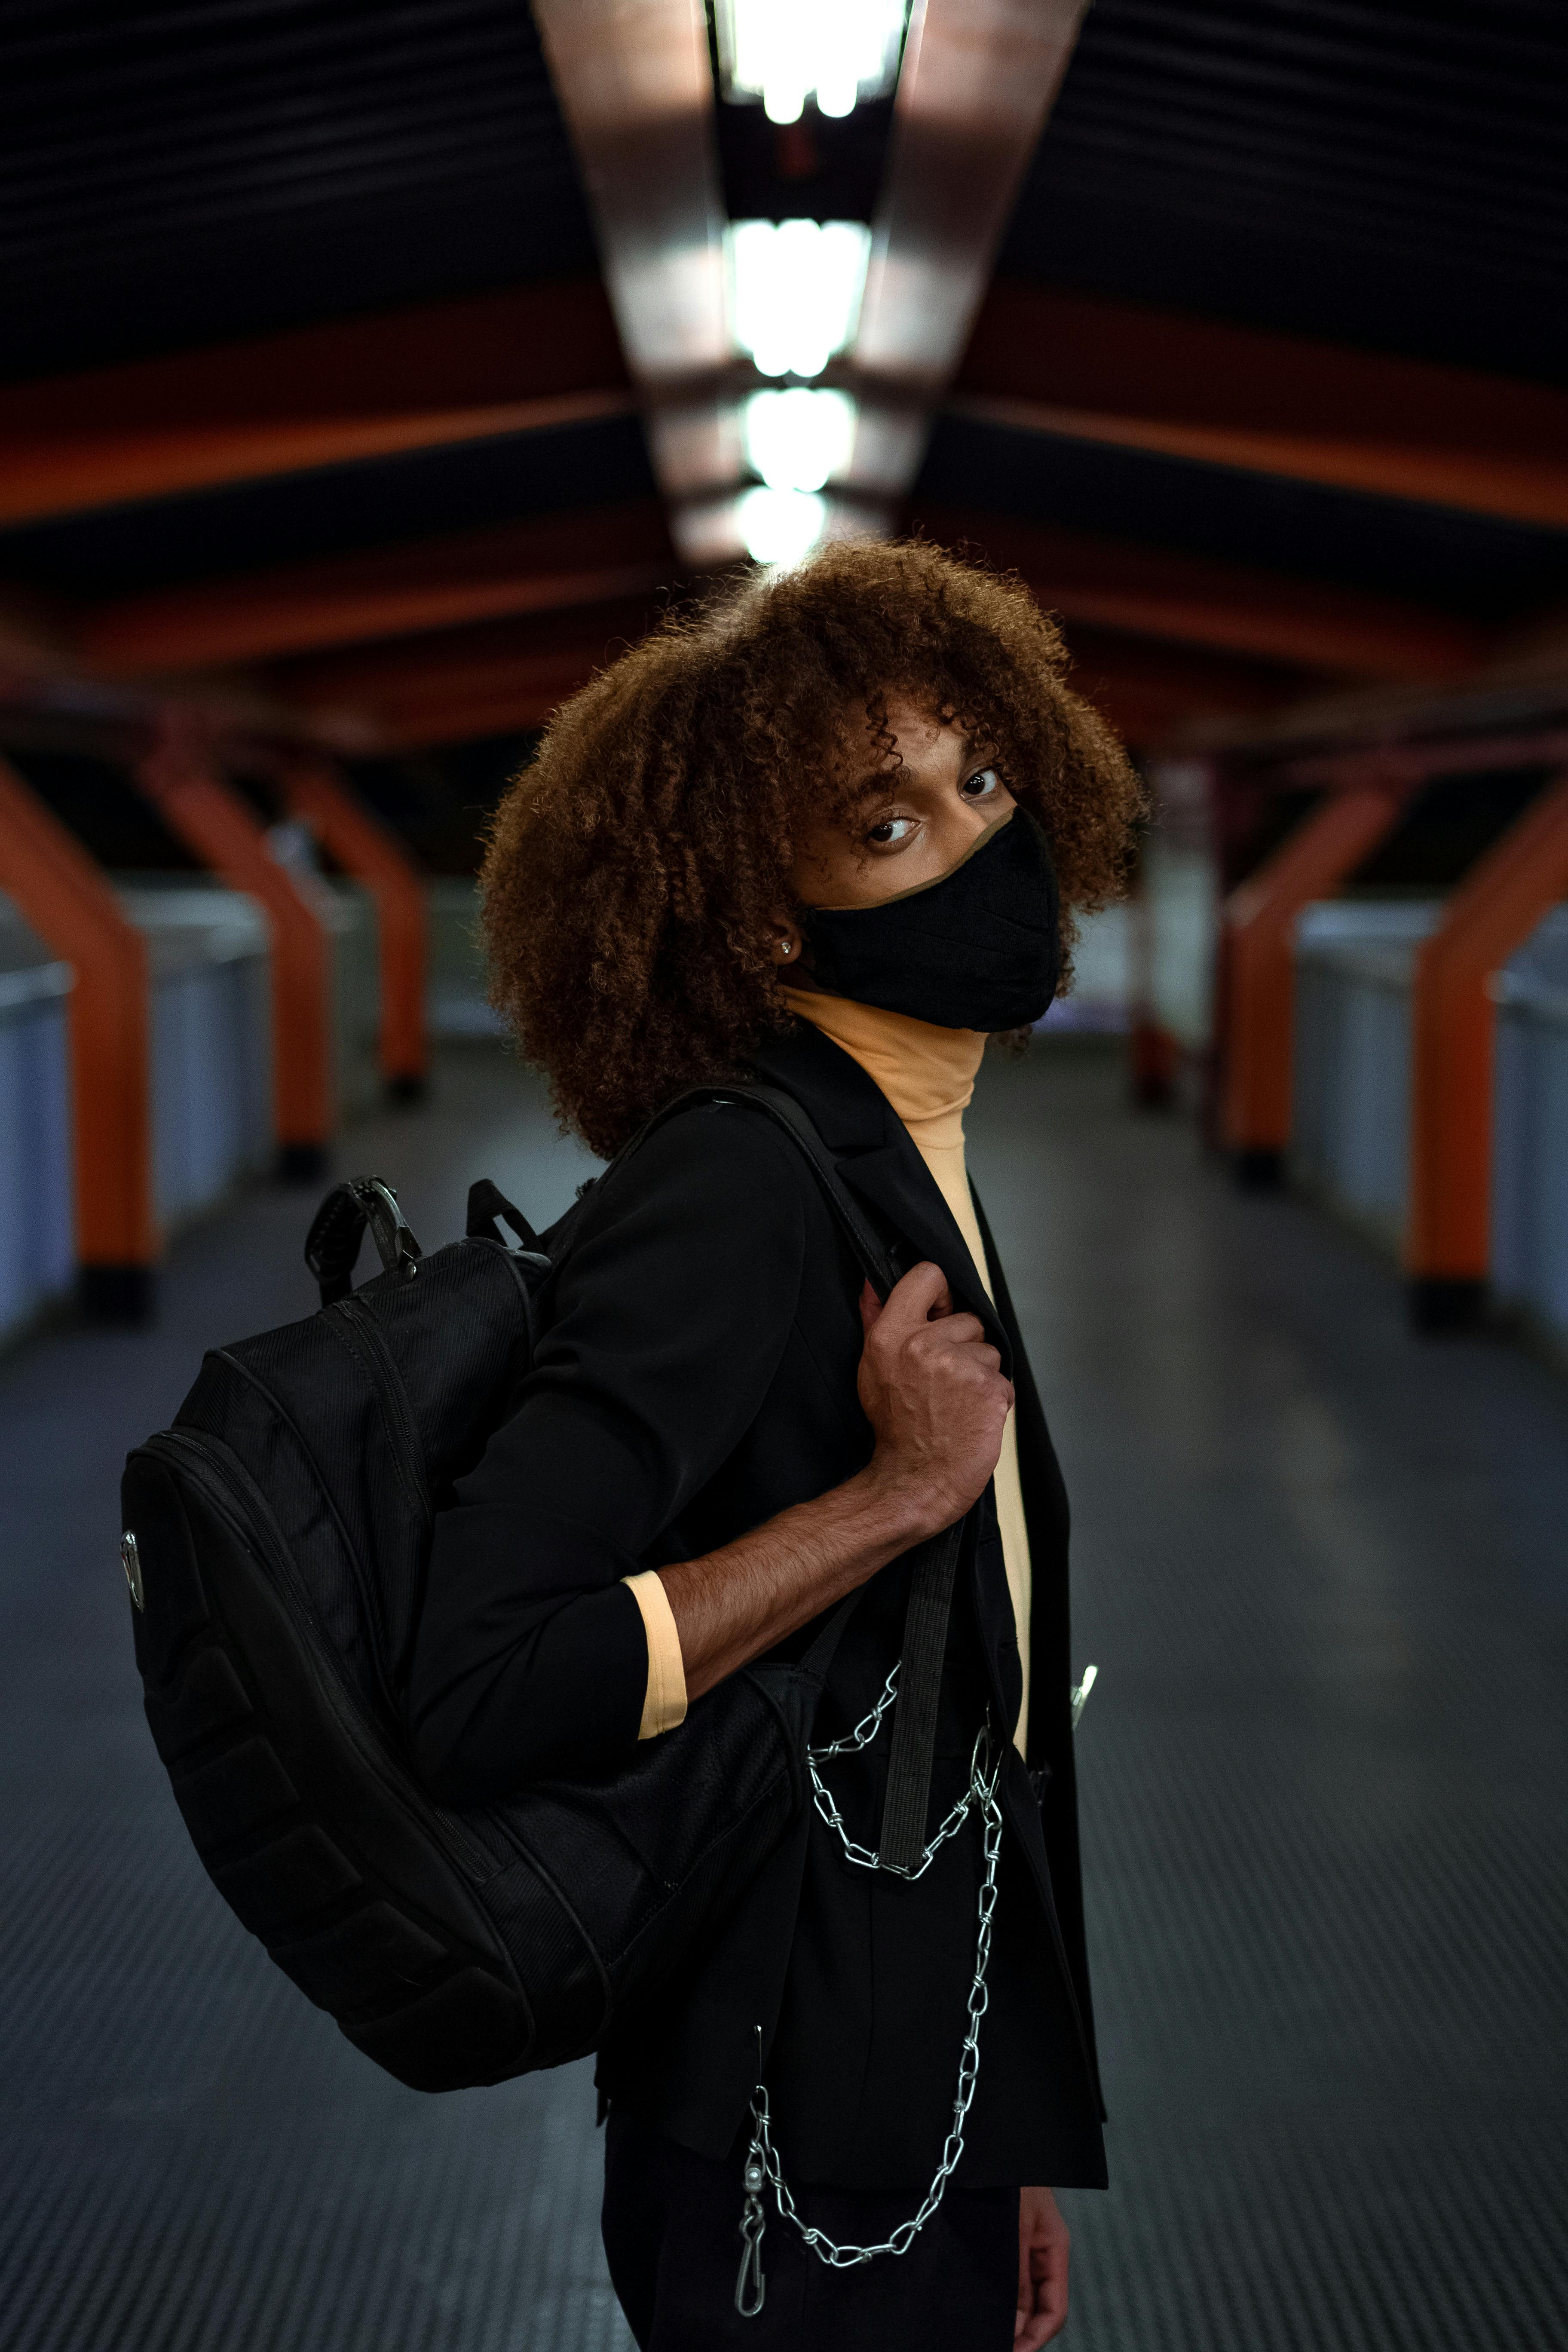 young black man in protective mask in subway